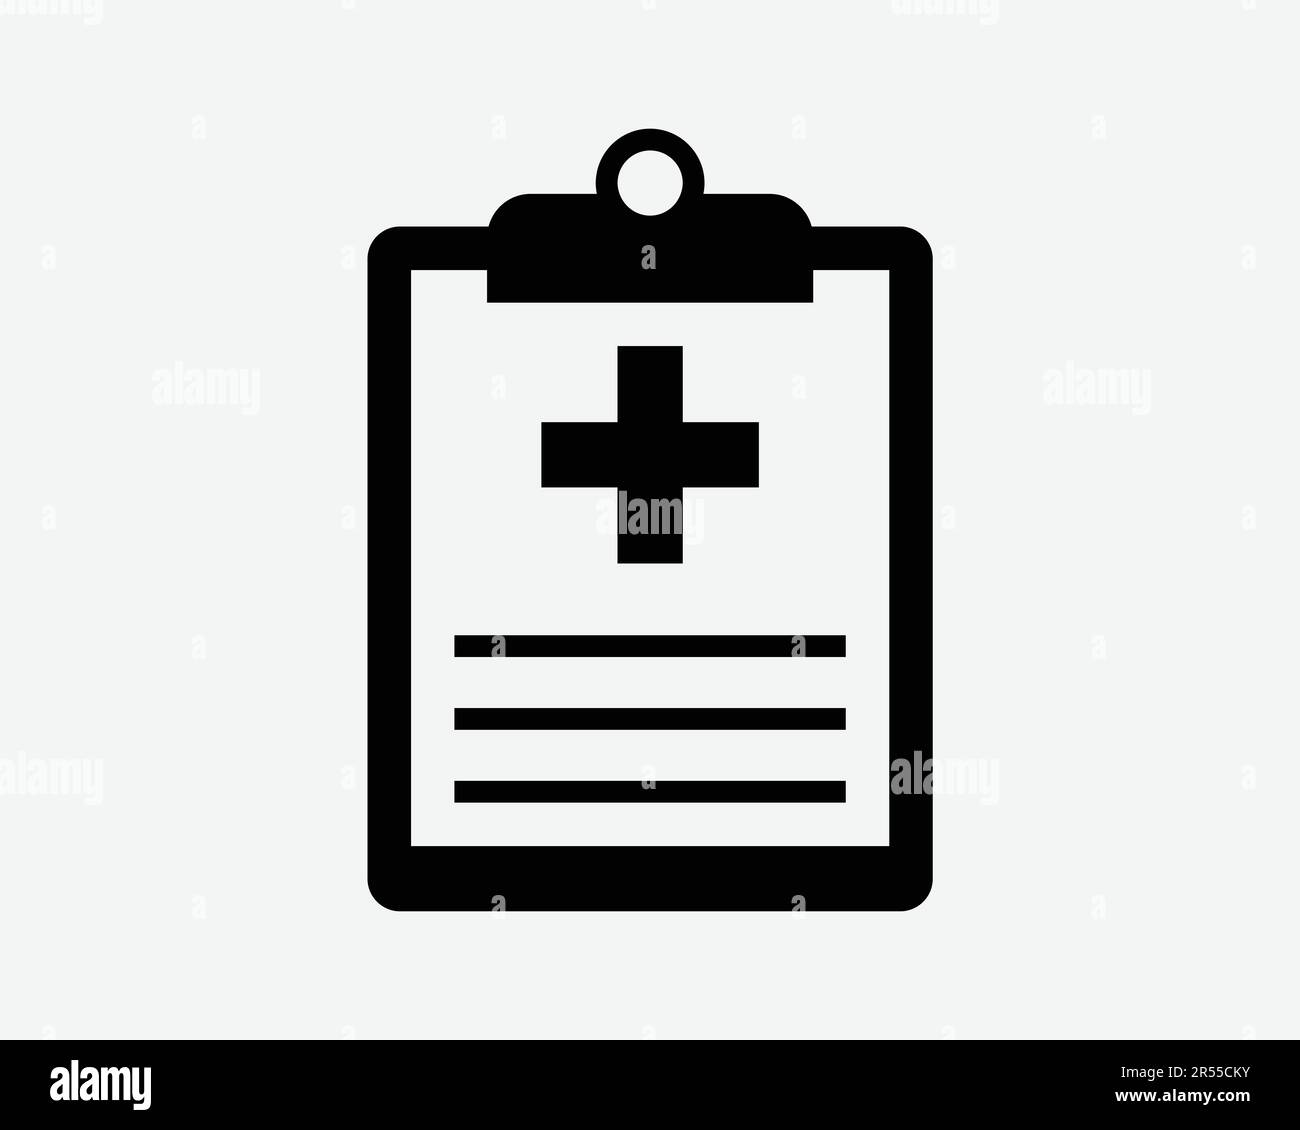 Medical Form Icon Clipboard Health Record Patient Information Hospital List Document Sign Symbol Black Artwork Graphic Illustration Clipart EPS Vector Stock Vector